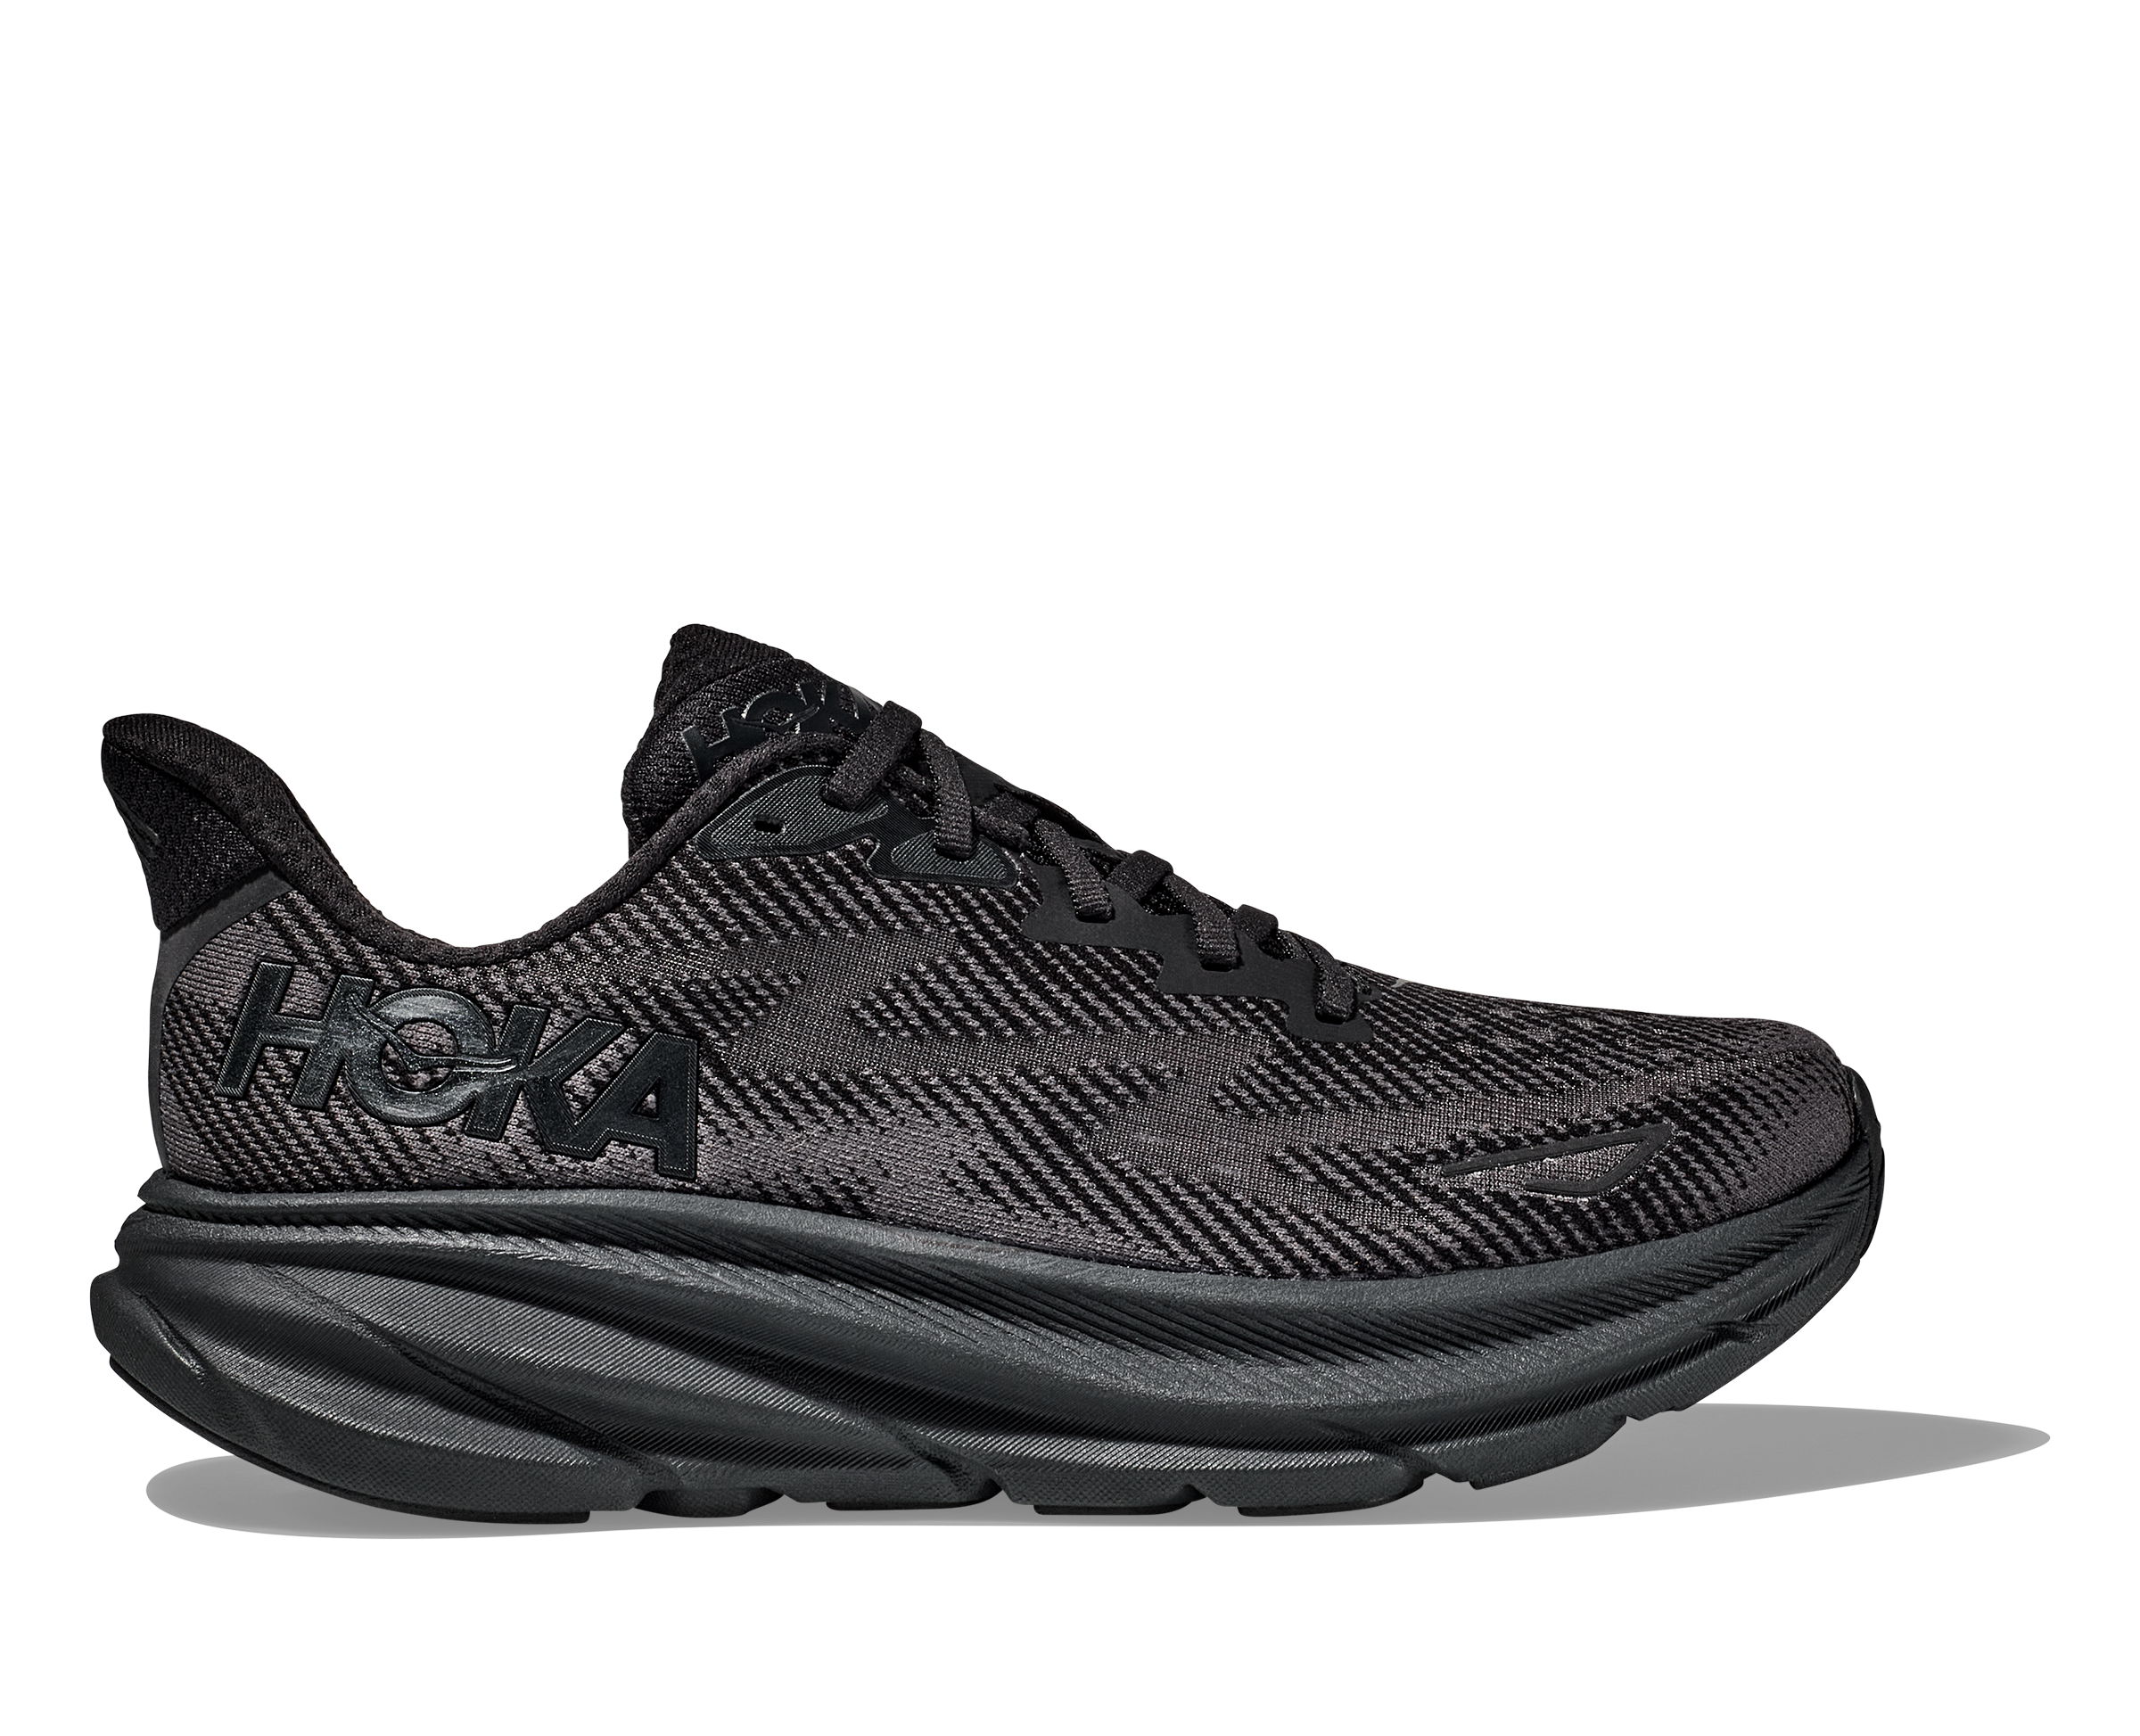 Hoka Clifton 9 Review: The Softest and Lightest Clifton Yet